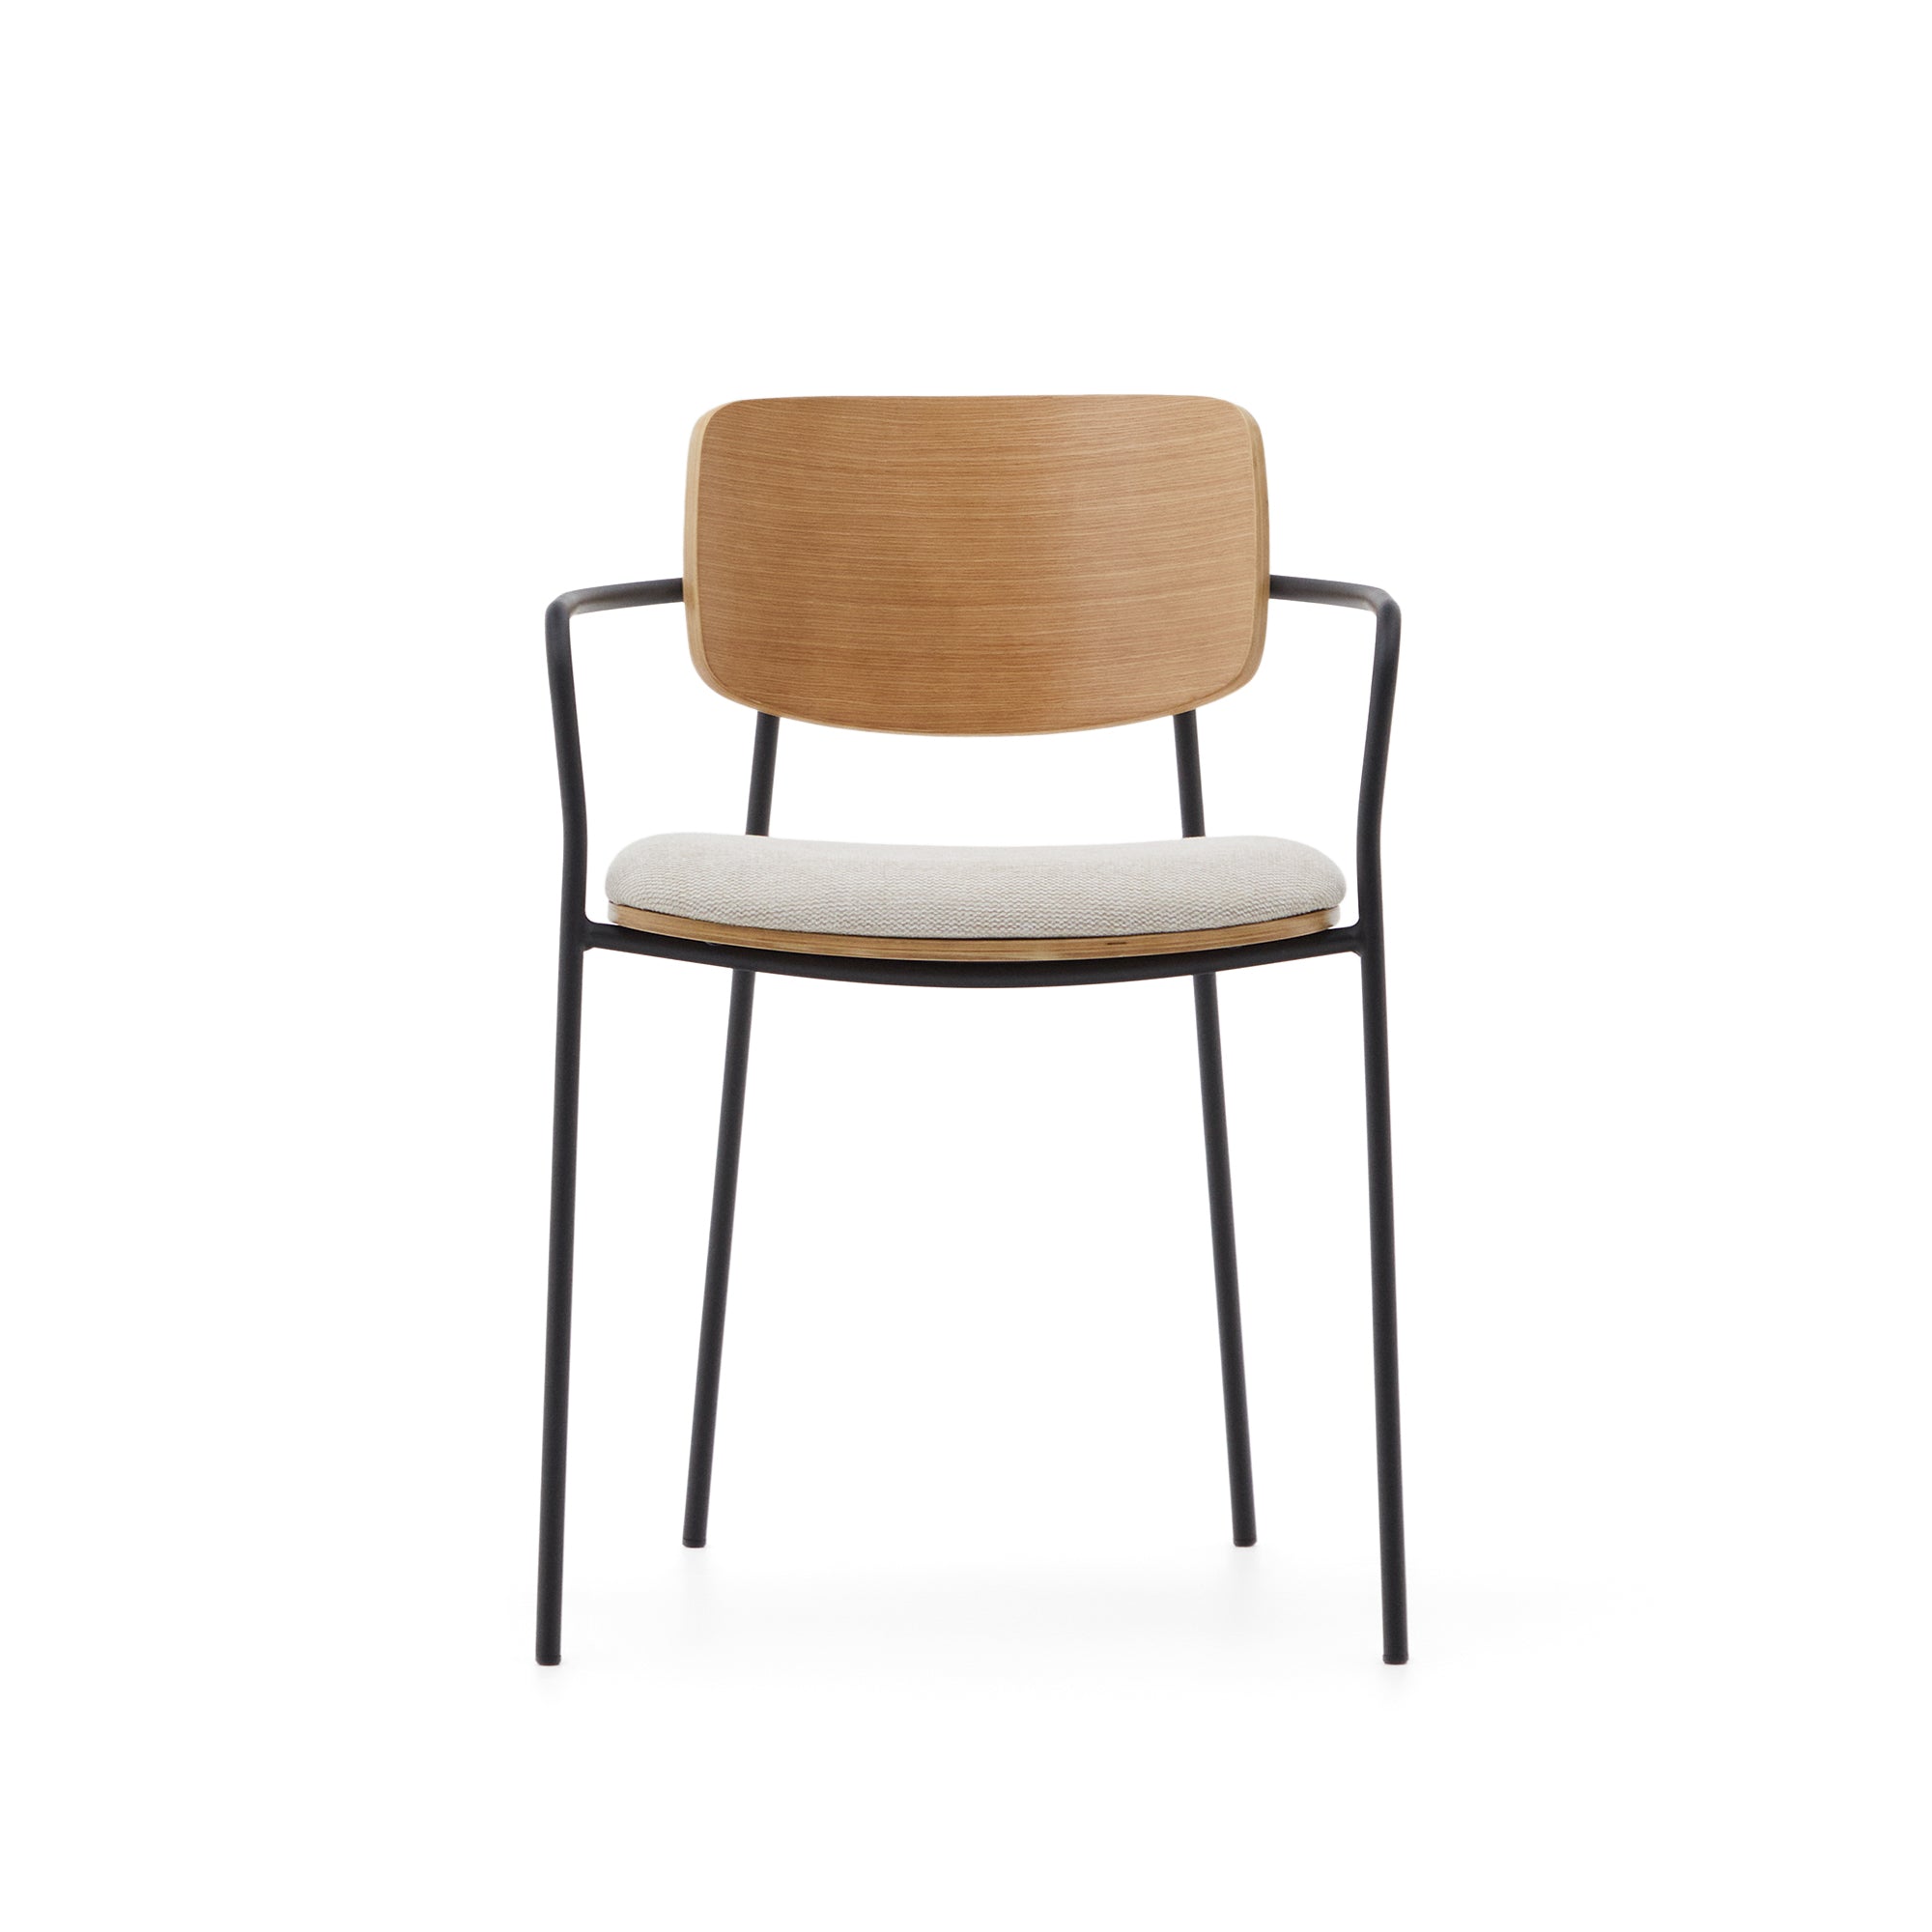 Maureen stackable chair with oak veneer in natural finish and metal in black finish